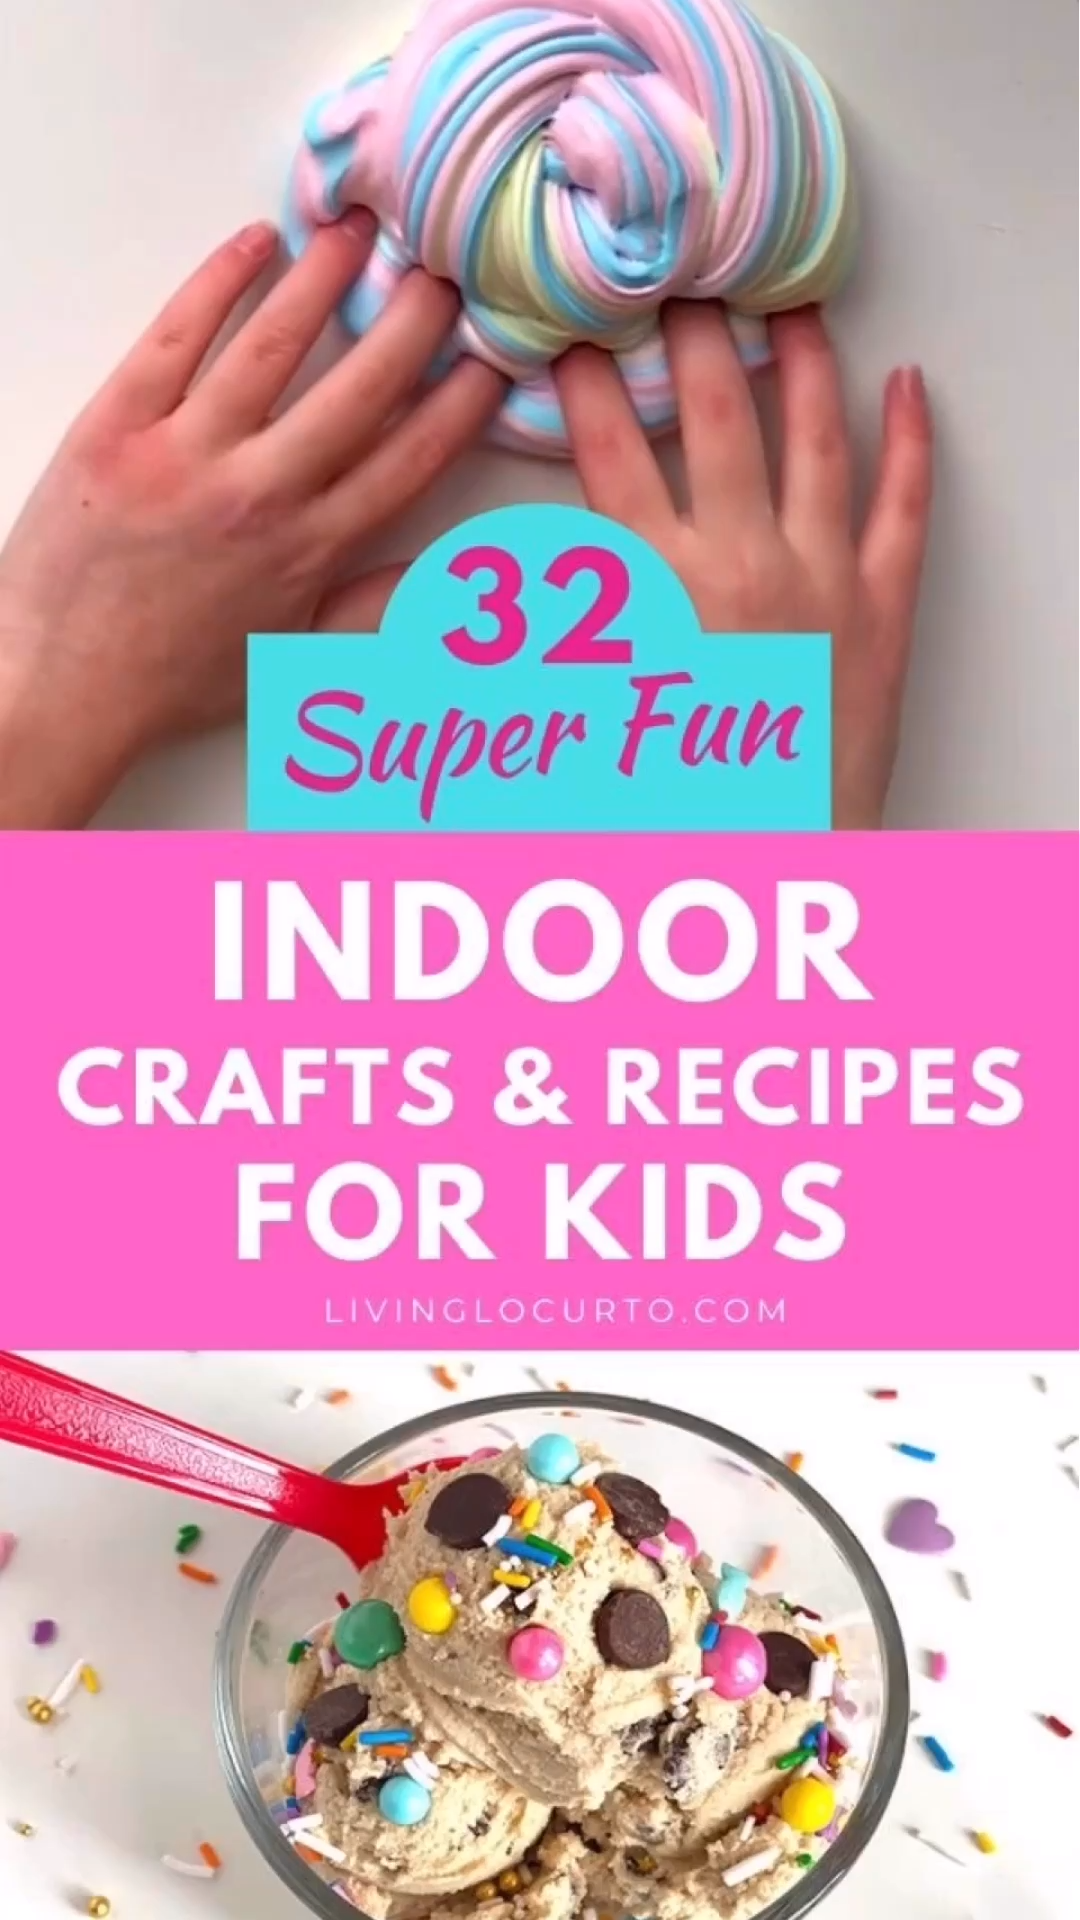 Indoor Crafts For Kids - Indoor Crafts For Kids -   diy Projects for teen girls